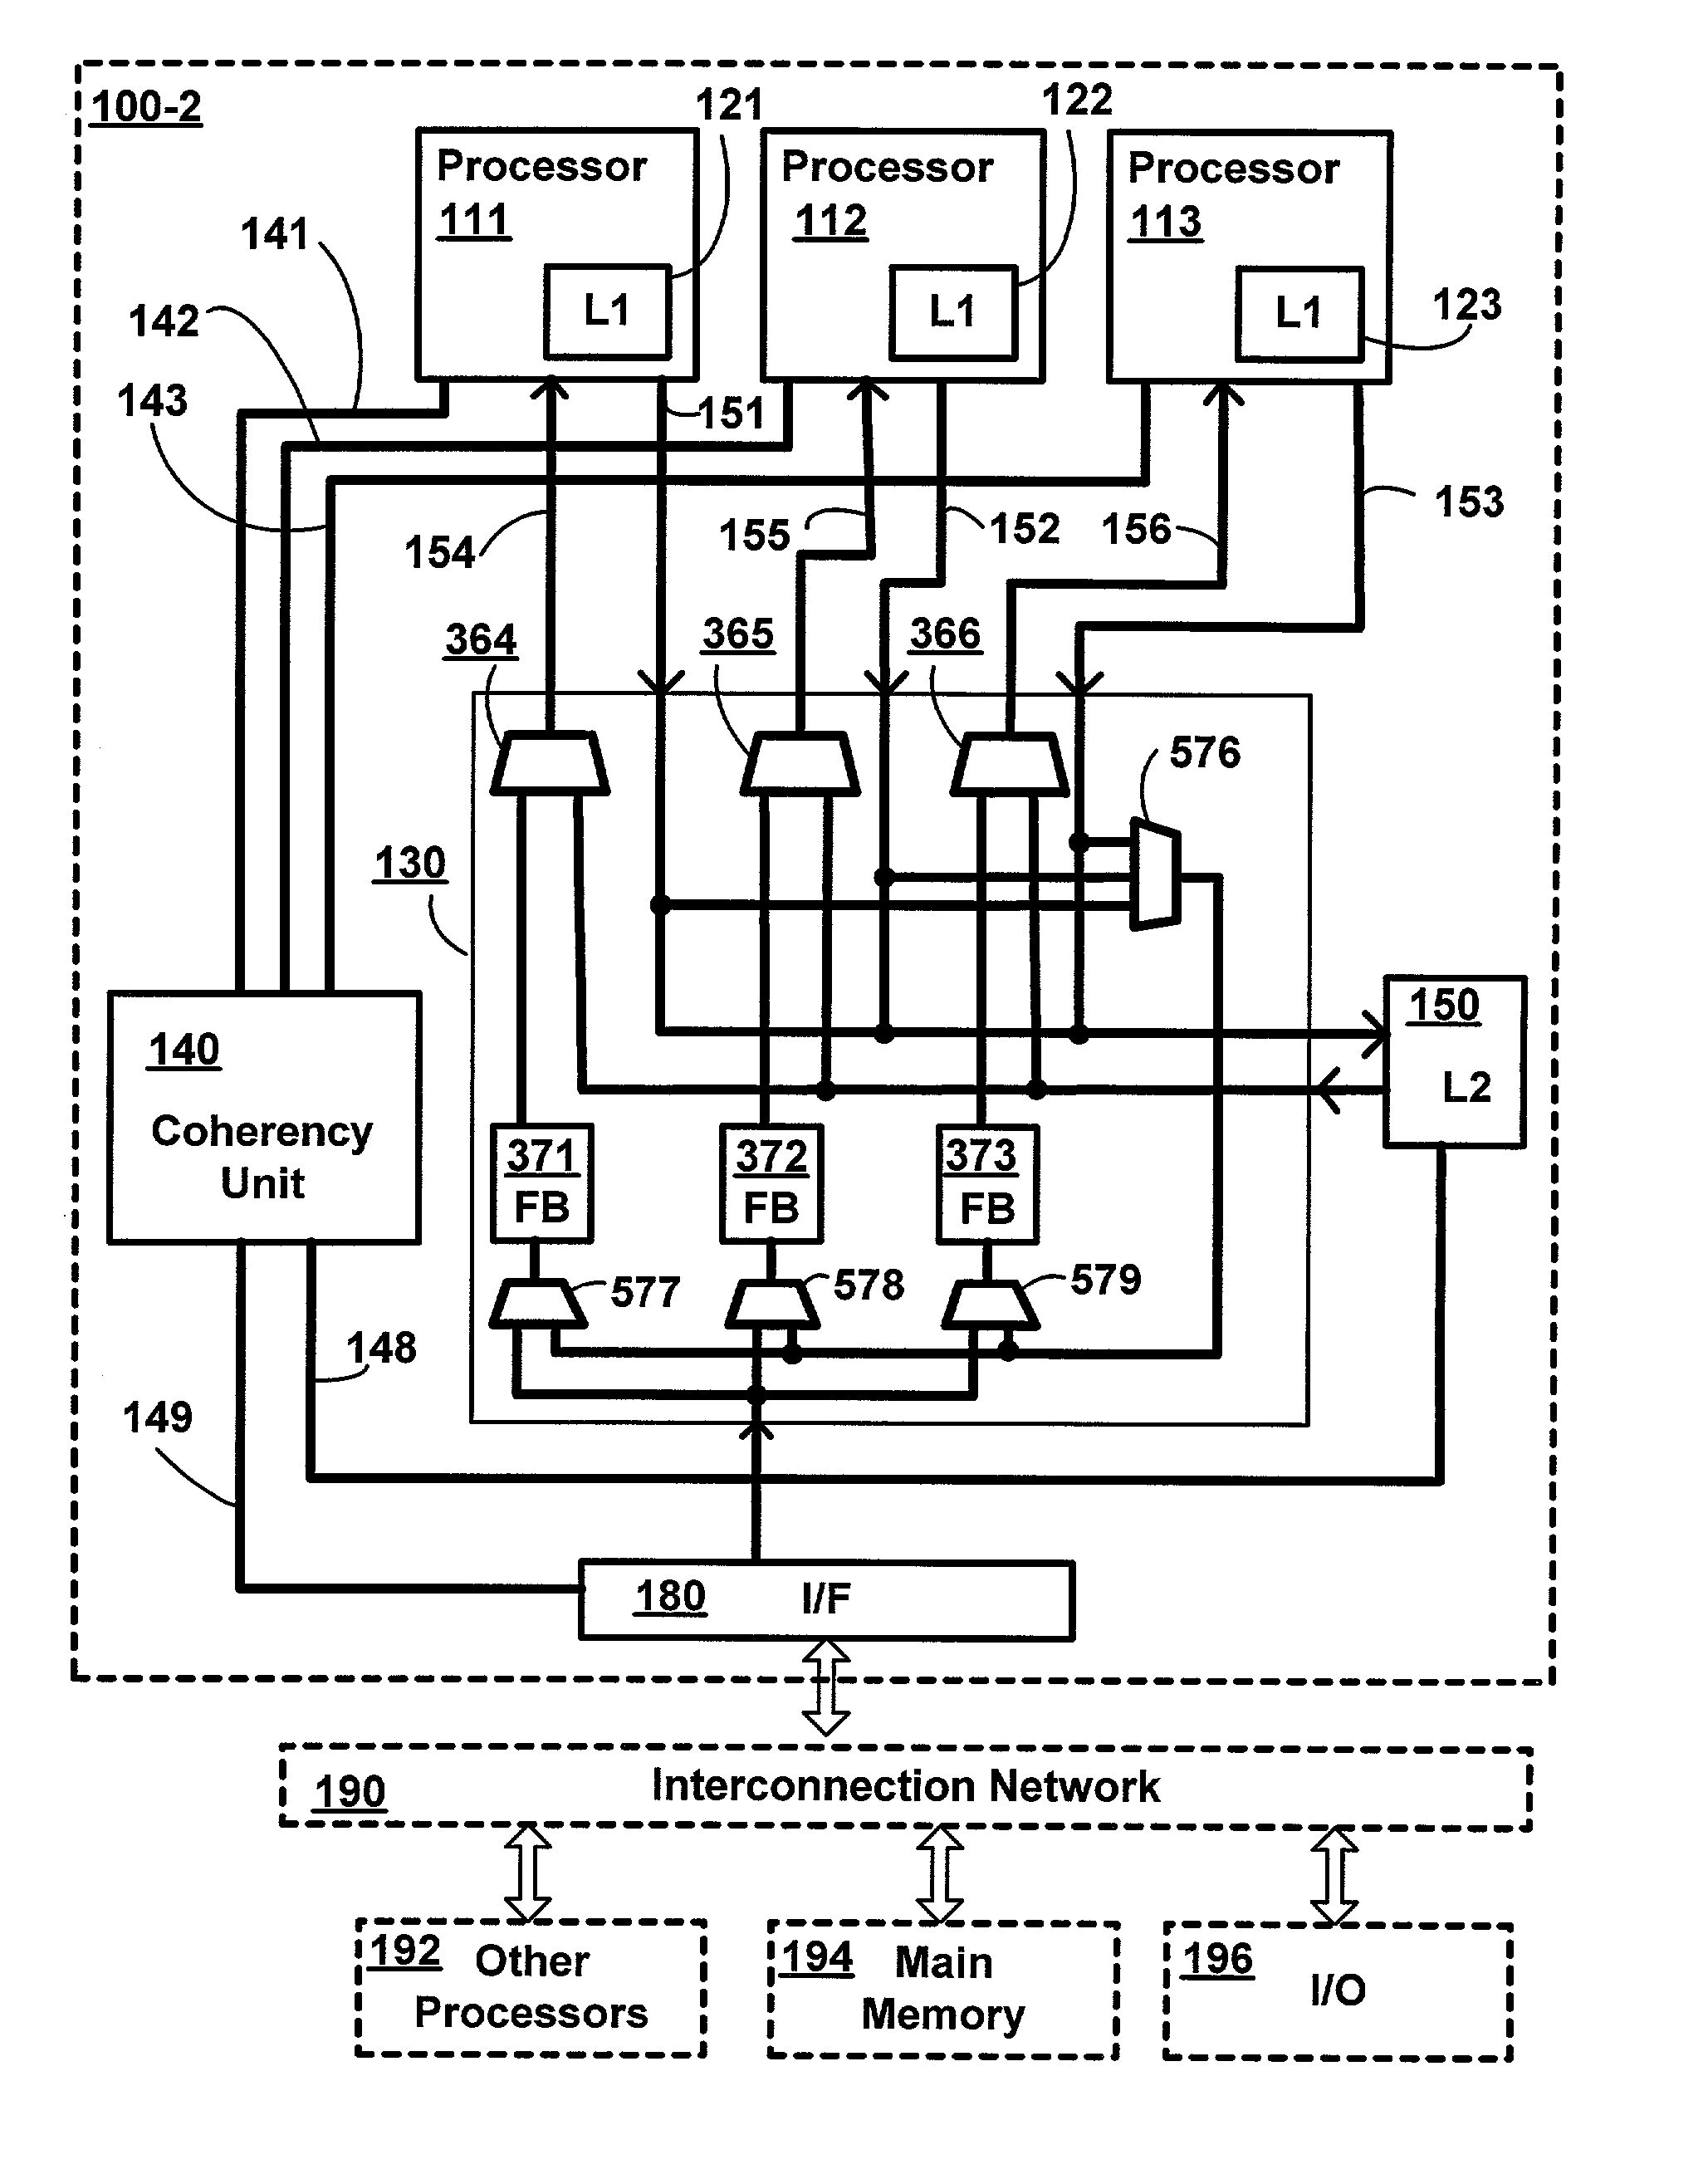 Transfer of cache lines on-chip between processing cores in a multi-core system